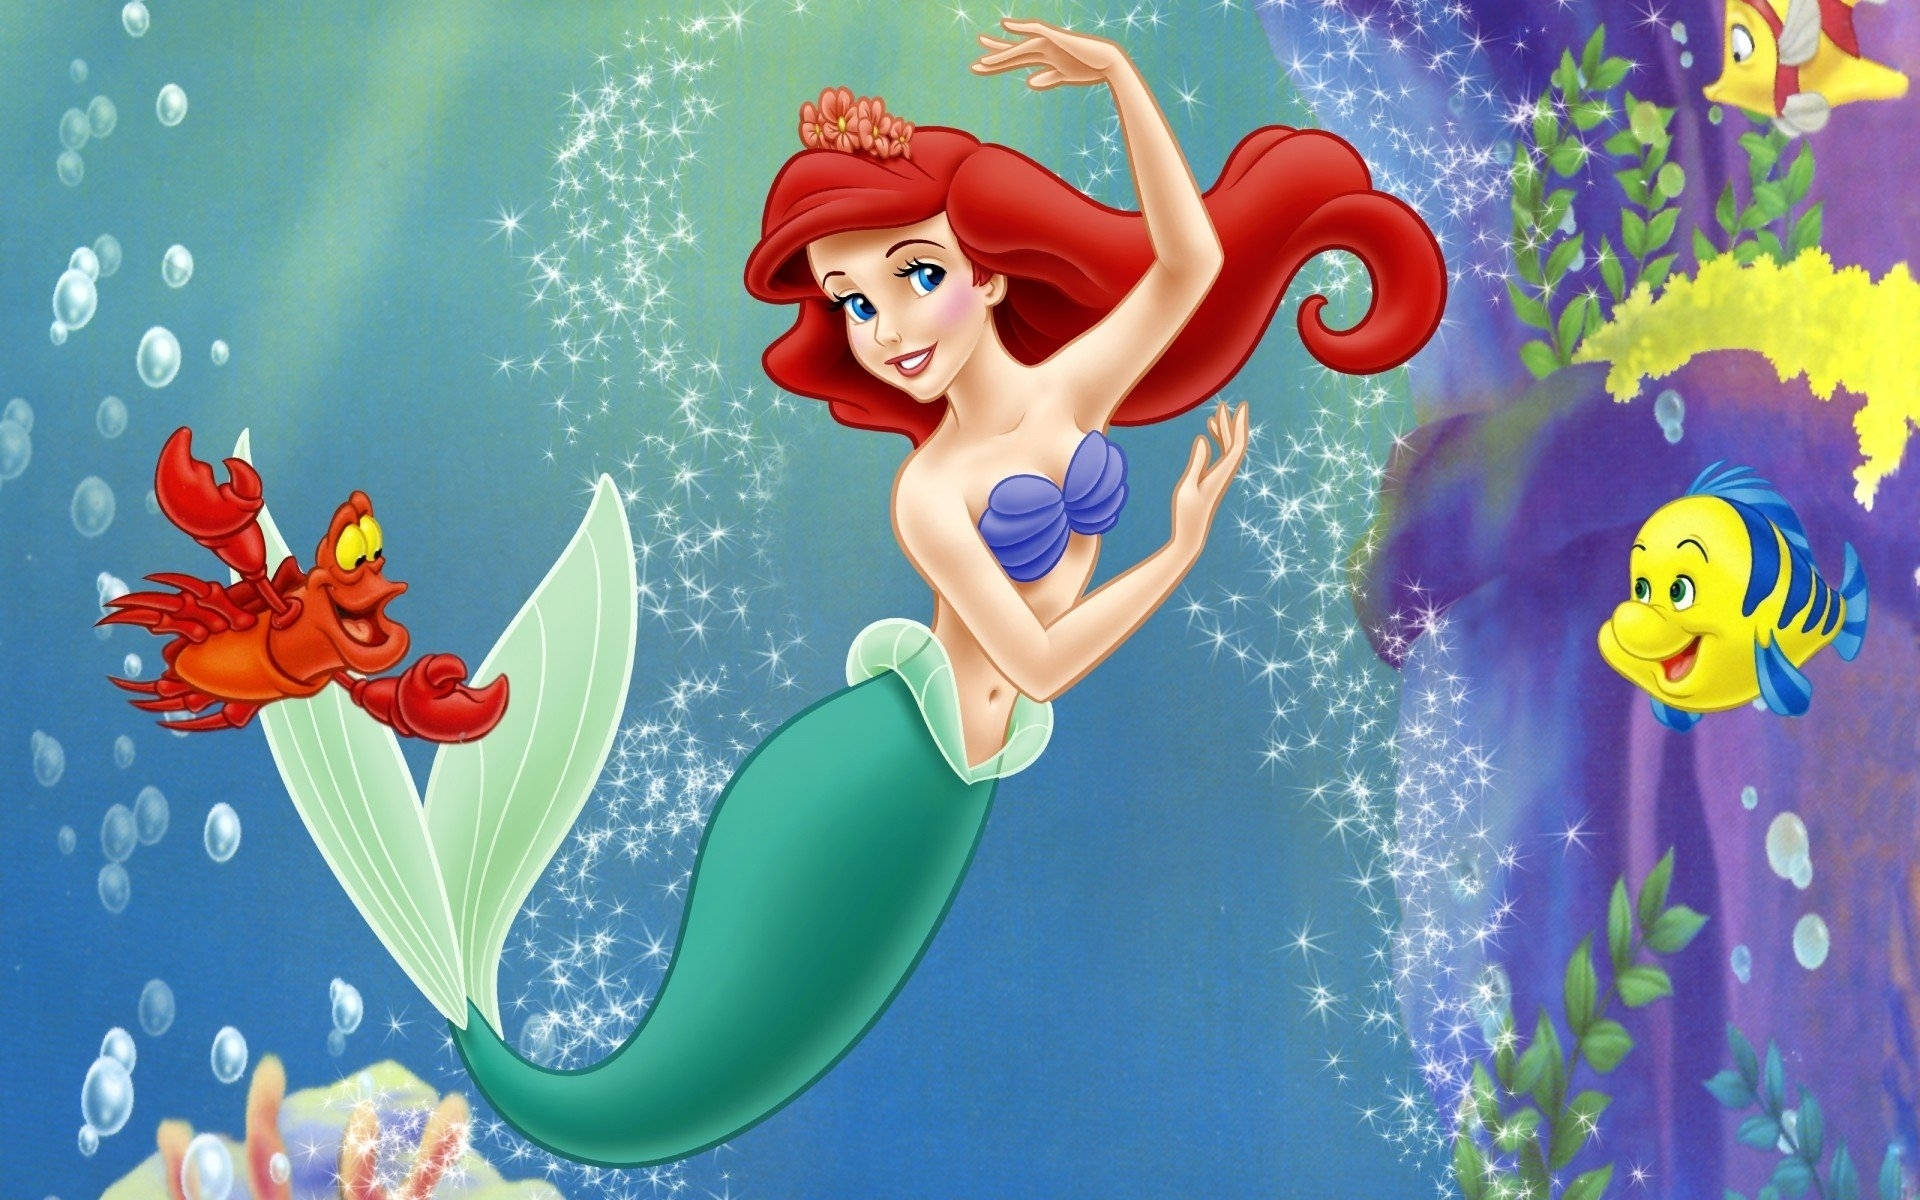 Disney Princess Ariel With Fishes